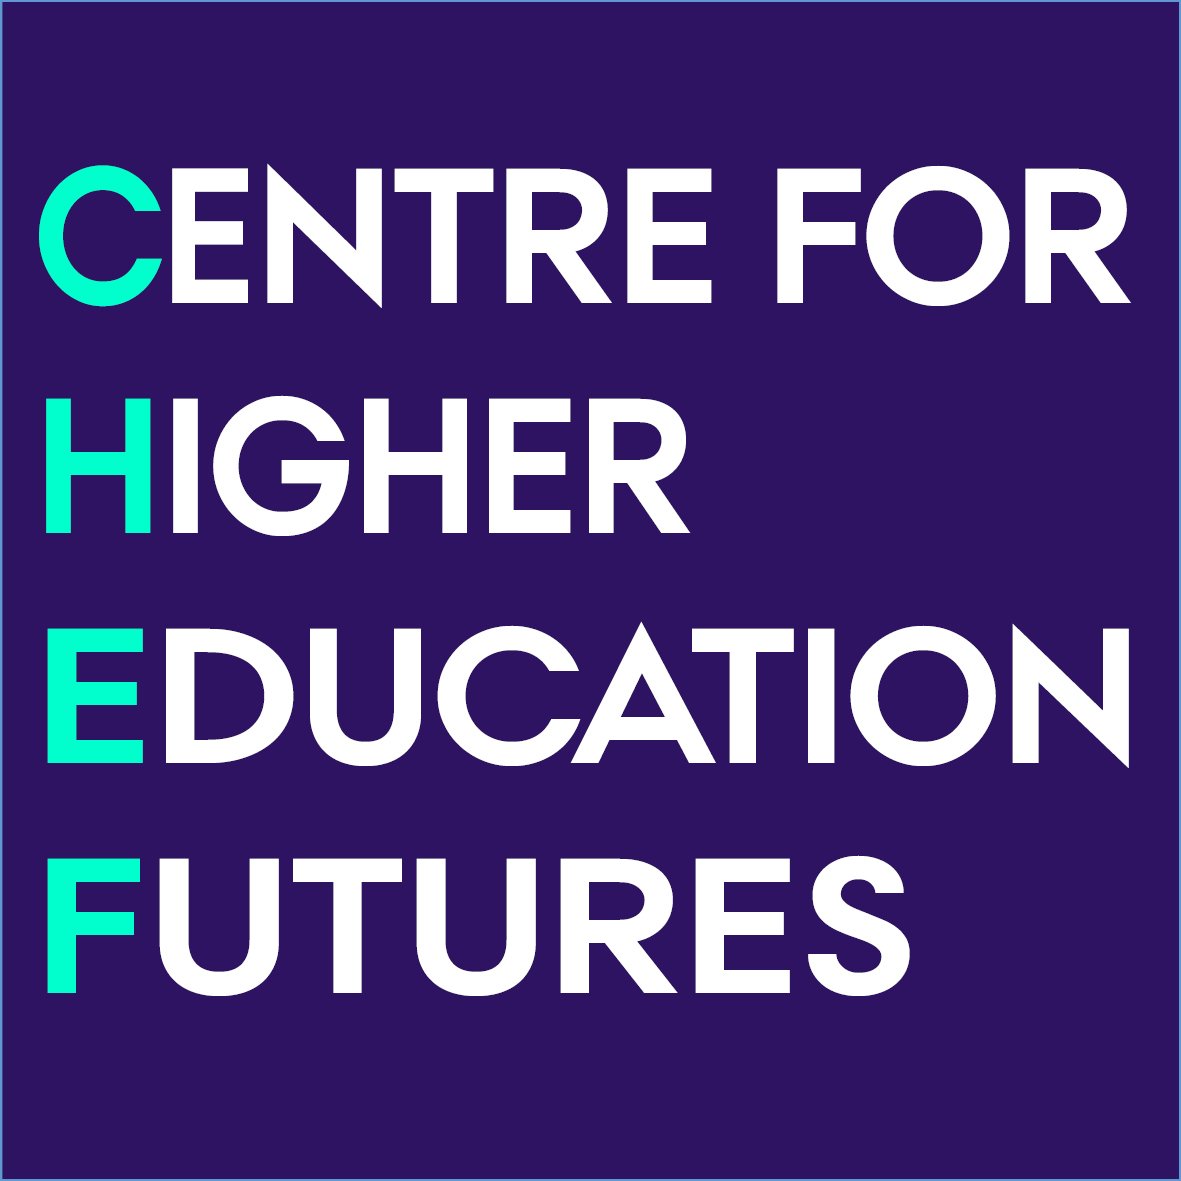 Centre for Higher Education Futures at Aarhus University. Research hub for higher education, university futures and related policies.